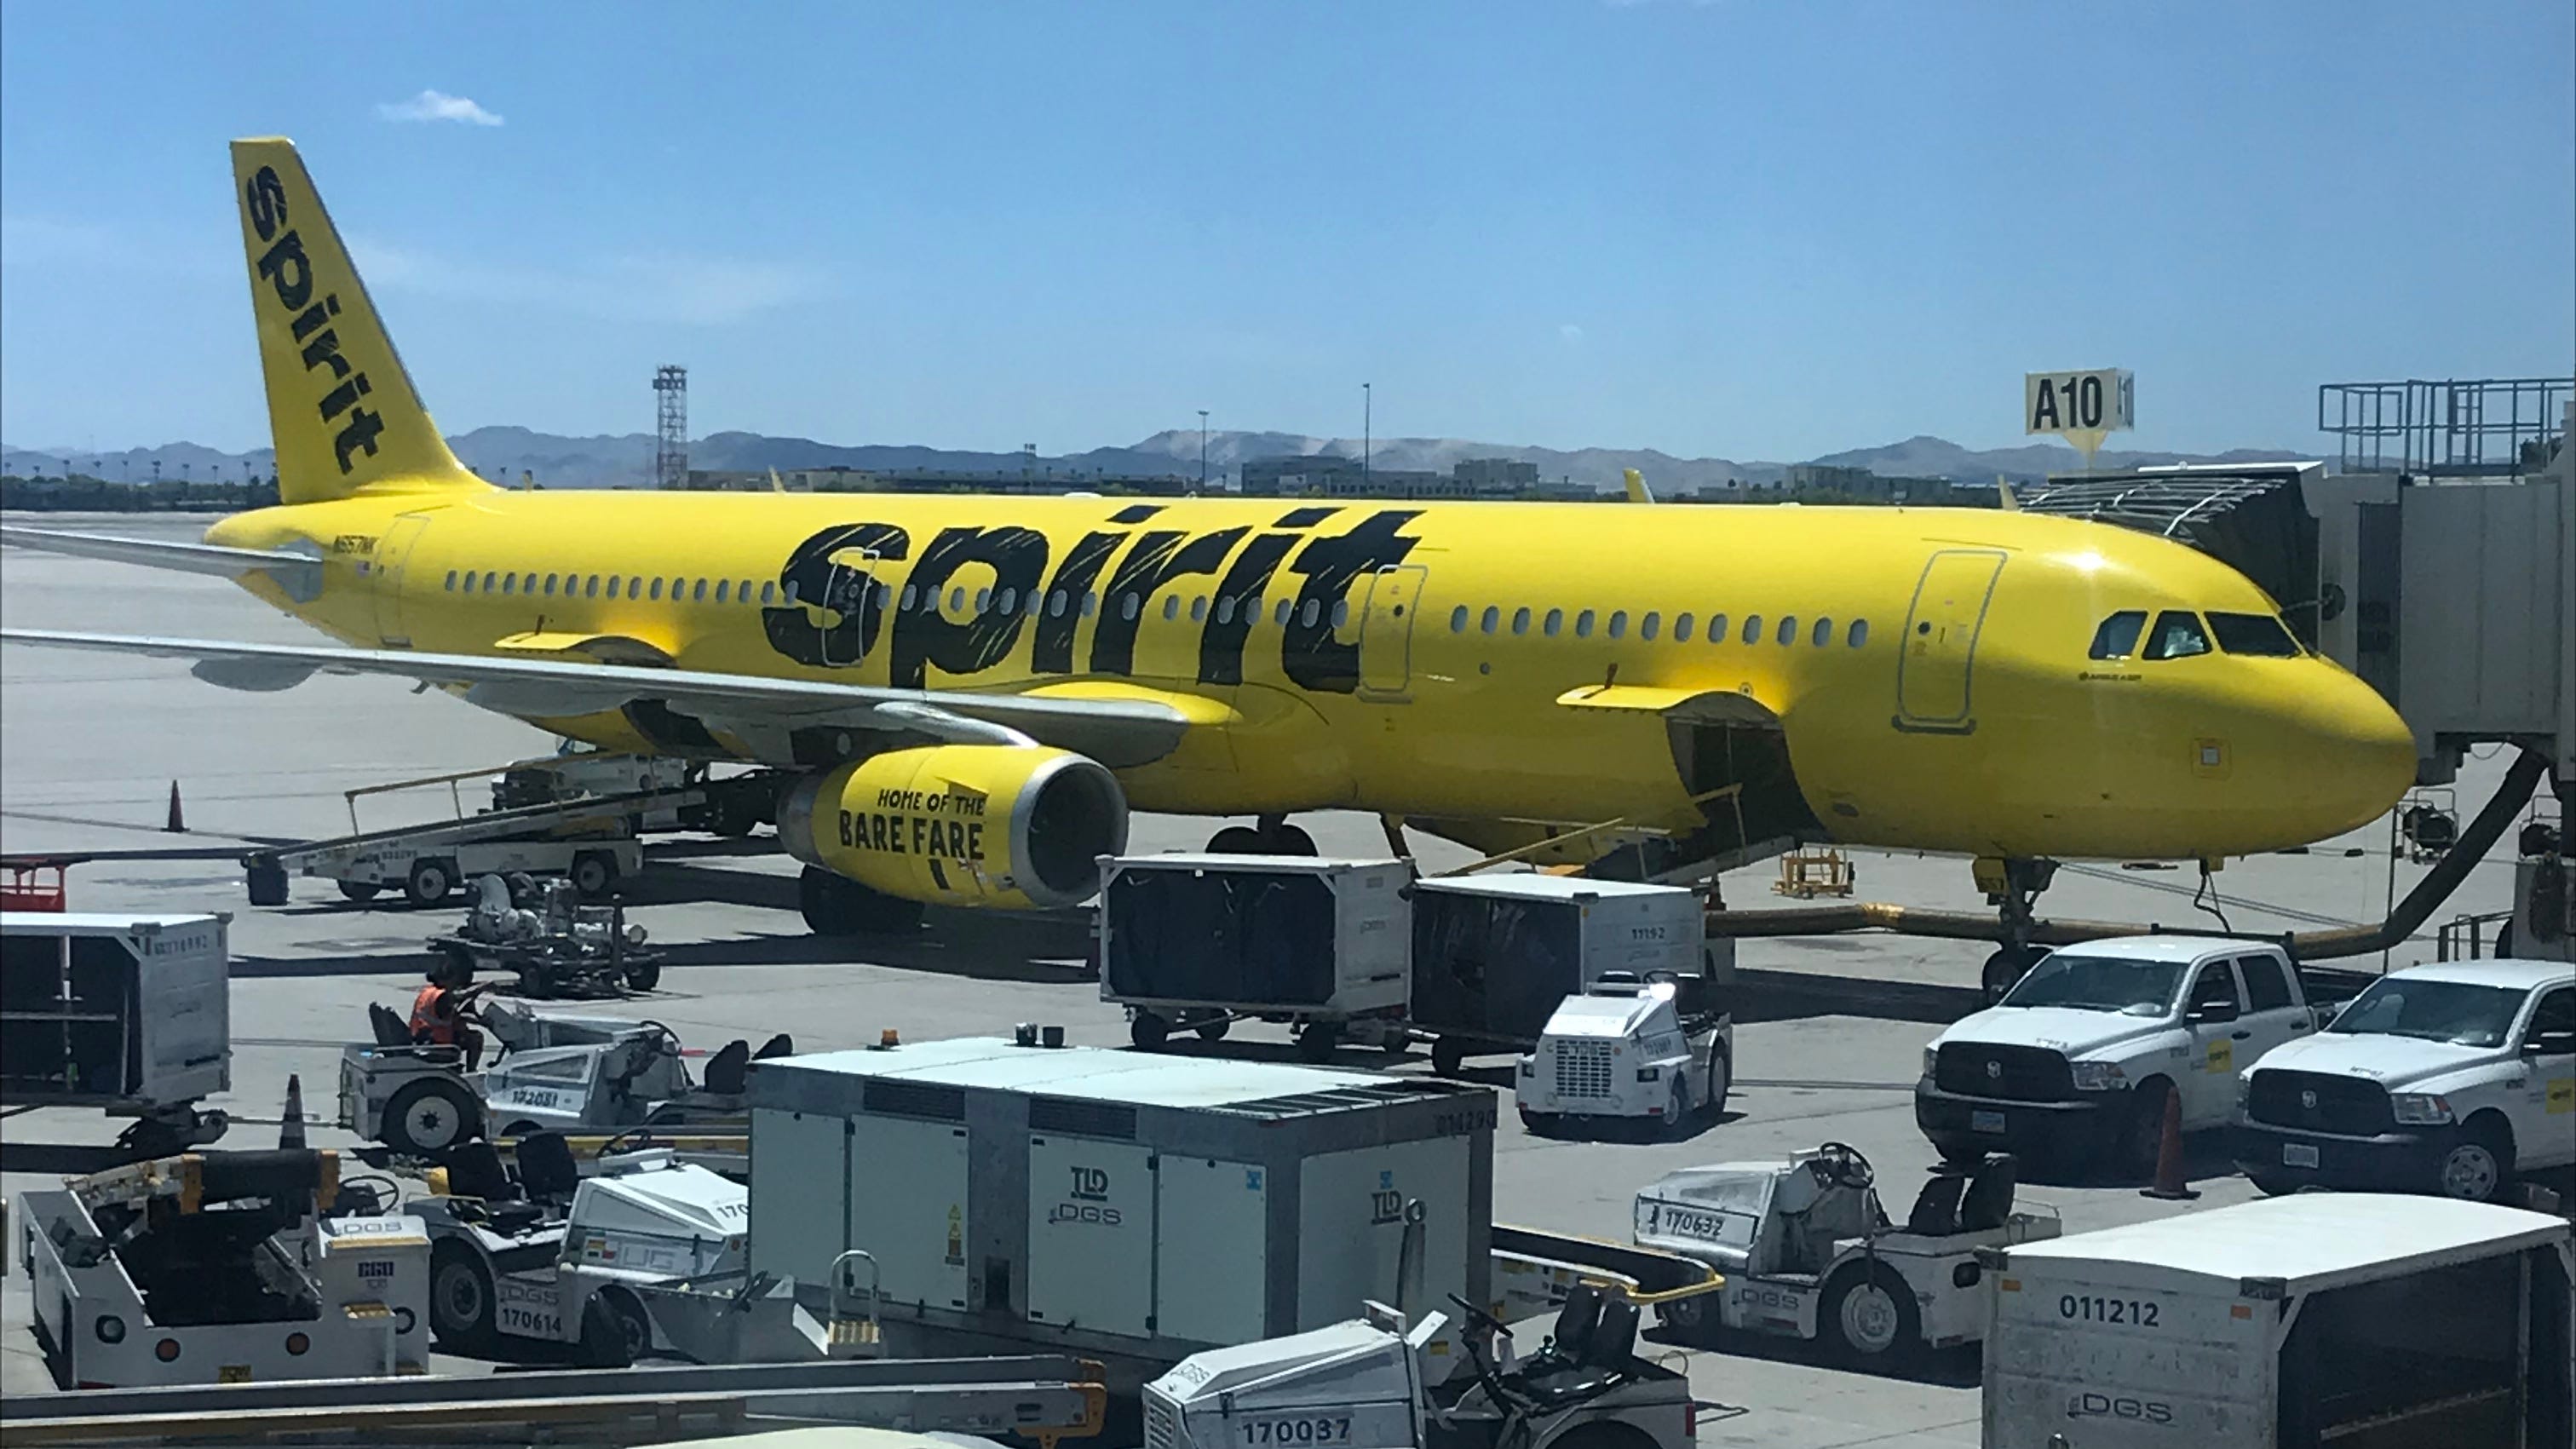 Spirit Airlines 7 flights, 5 days, 1 carryon, 0 delays or big issues